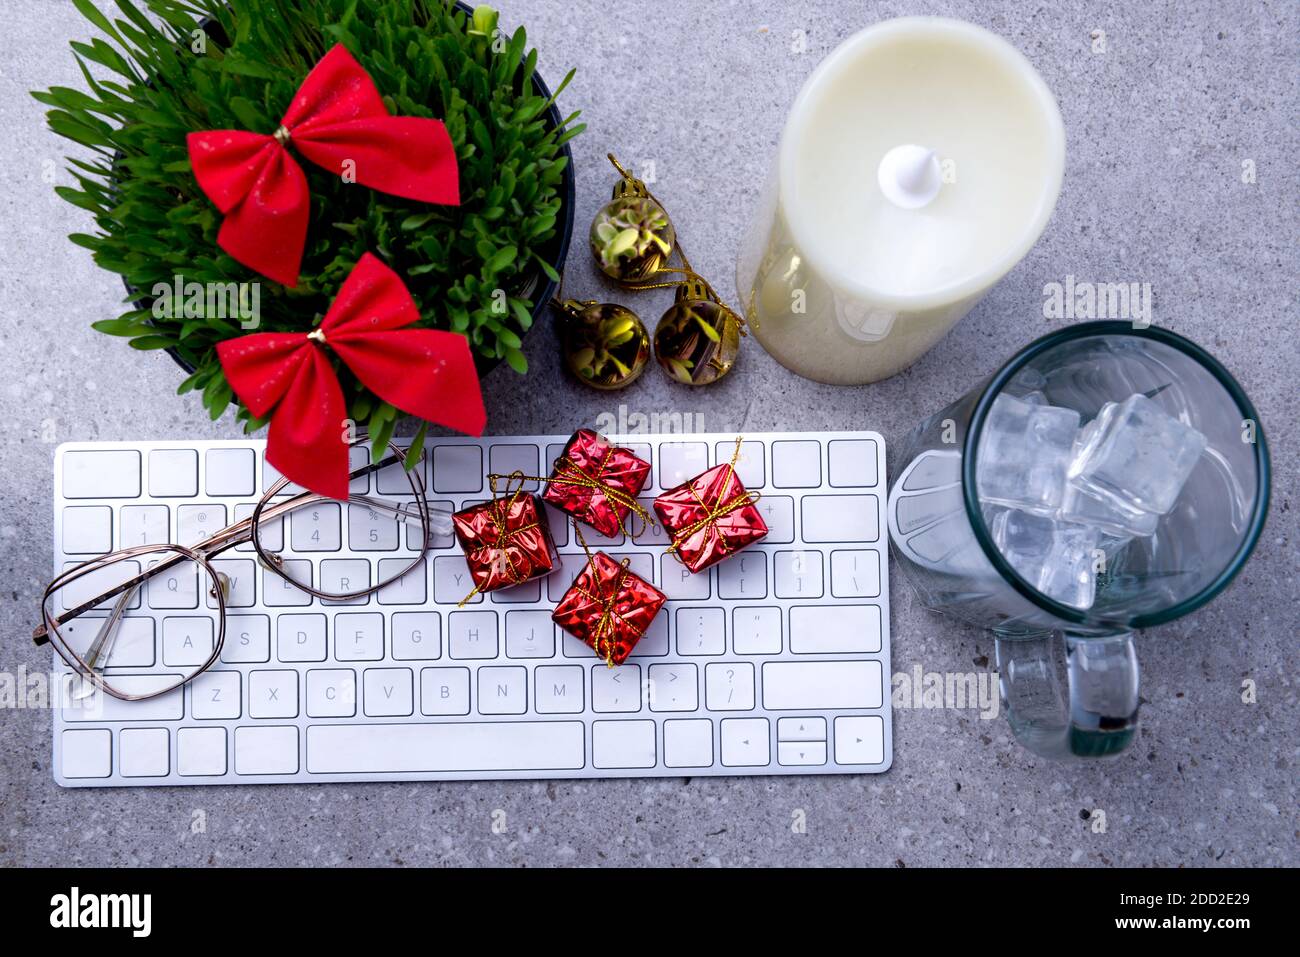 Close up view of millet grass plant in the pot with Christmas decoration, empty glass with an ice cube, and the keyboard on the desk Stock Photo